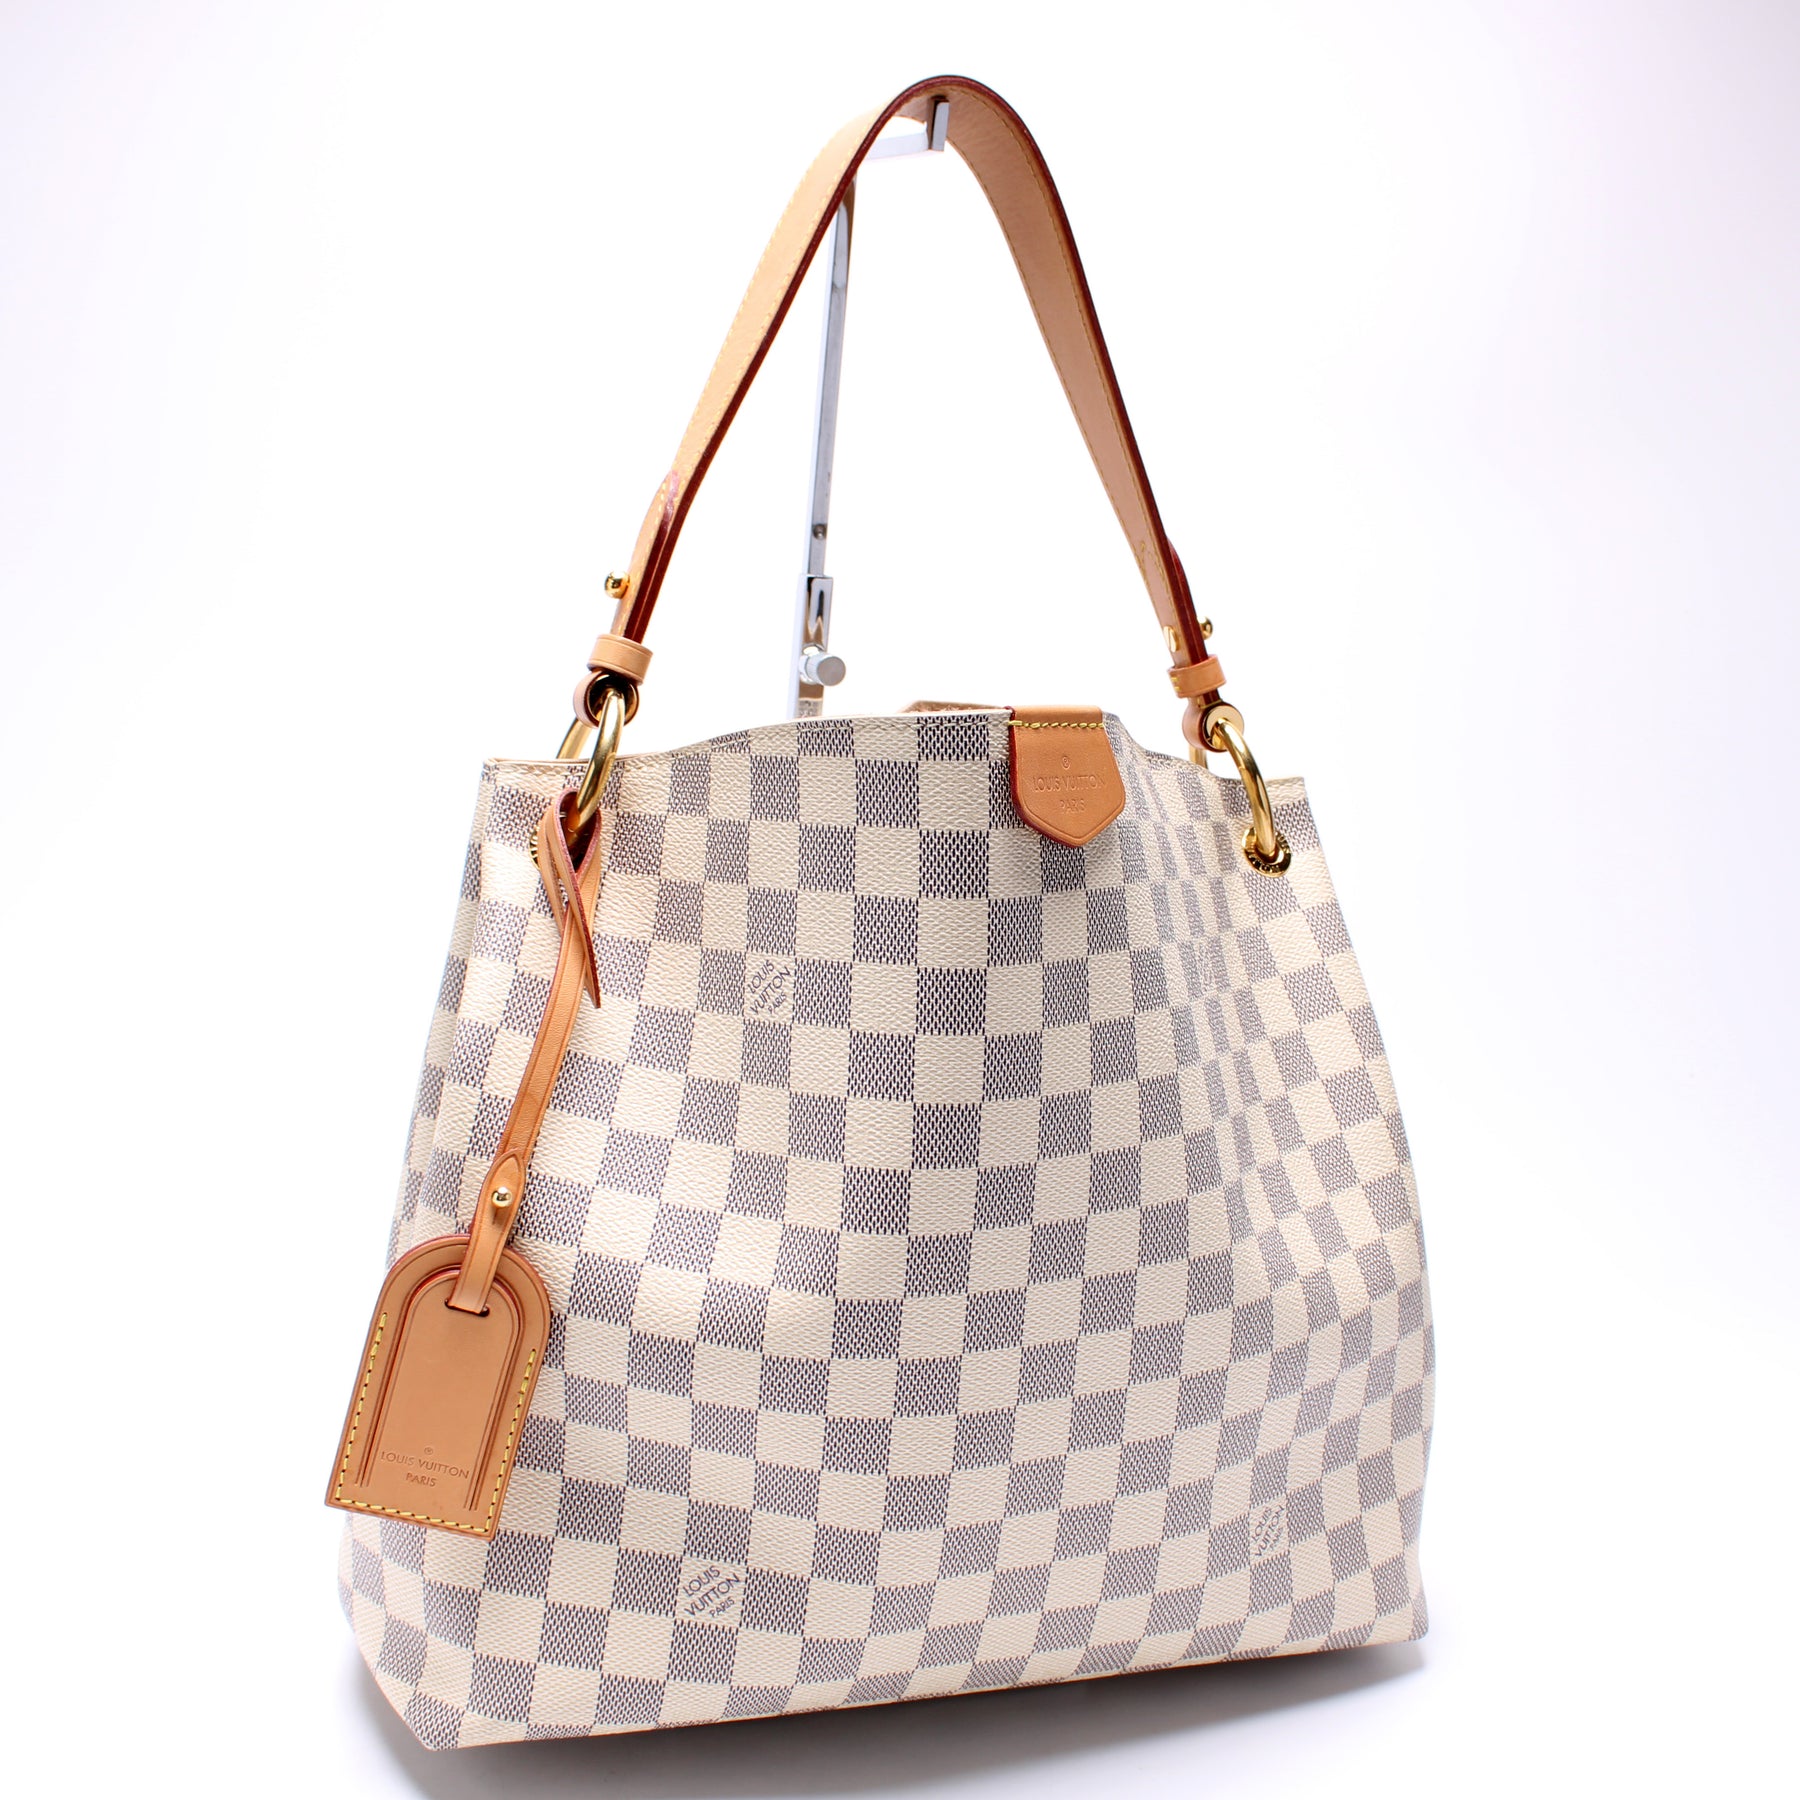 For Neverfull PM/Graceful PM/Day Tote and More